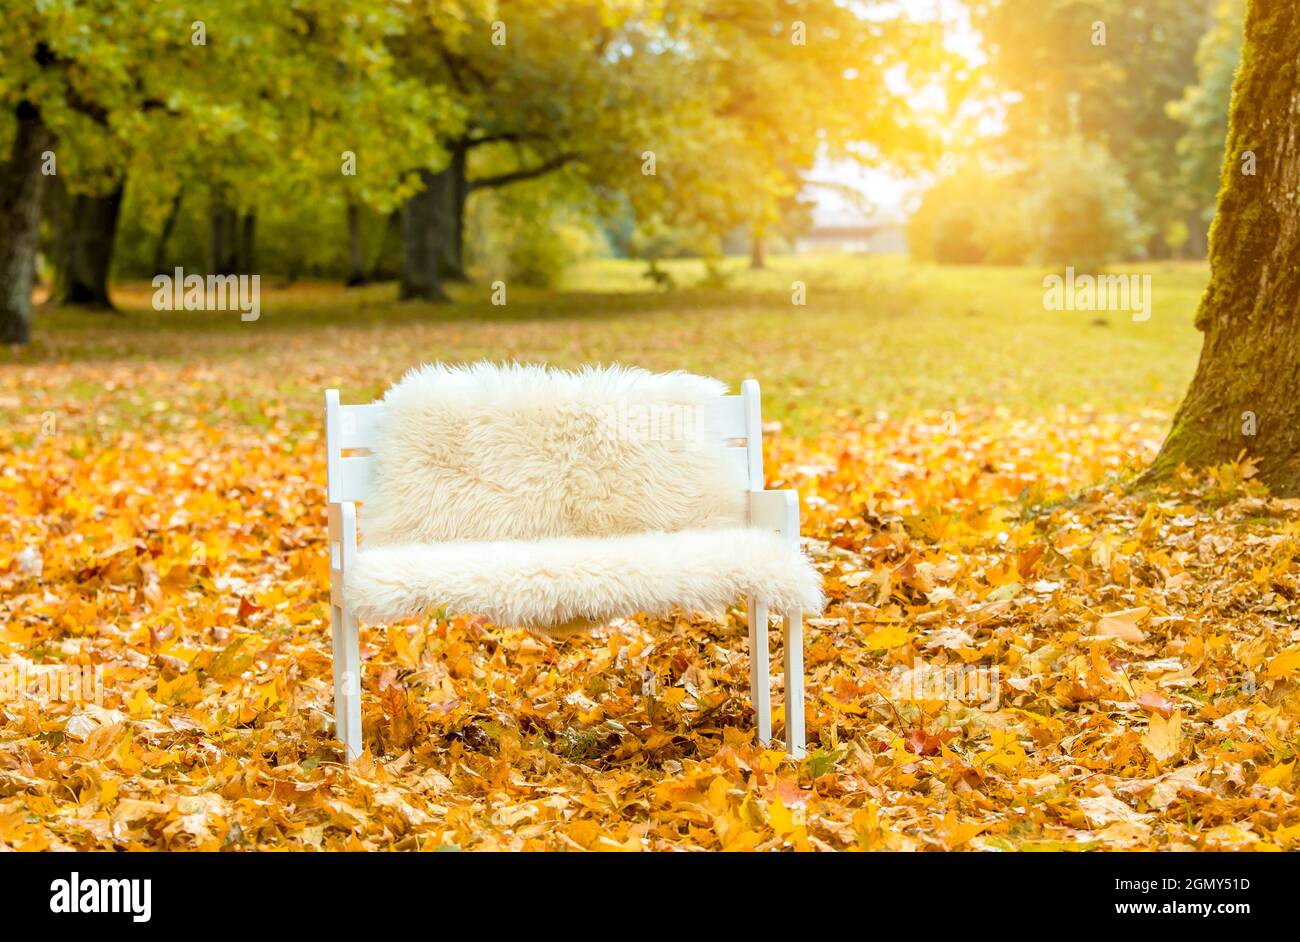 Idyllic autumn set with small white bench with soft sheepskin, lot of golden autumn maple leaves covering ground in park, sun coming from background. Stock Photo